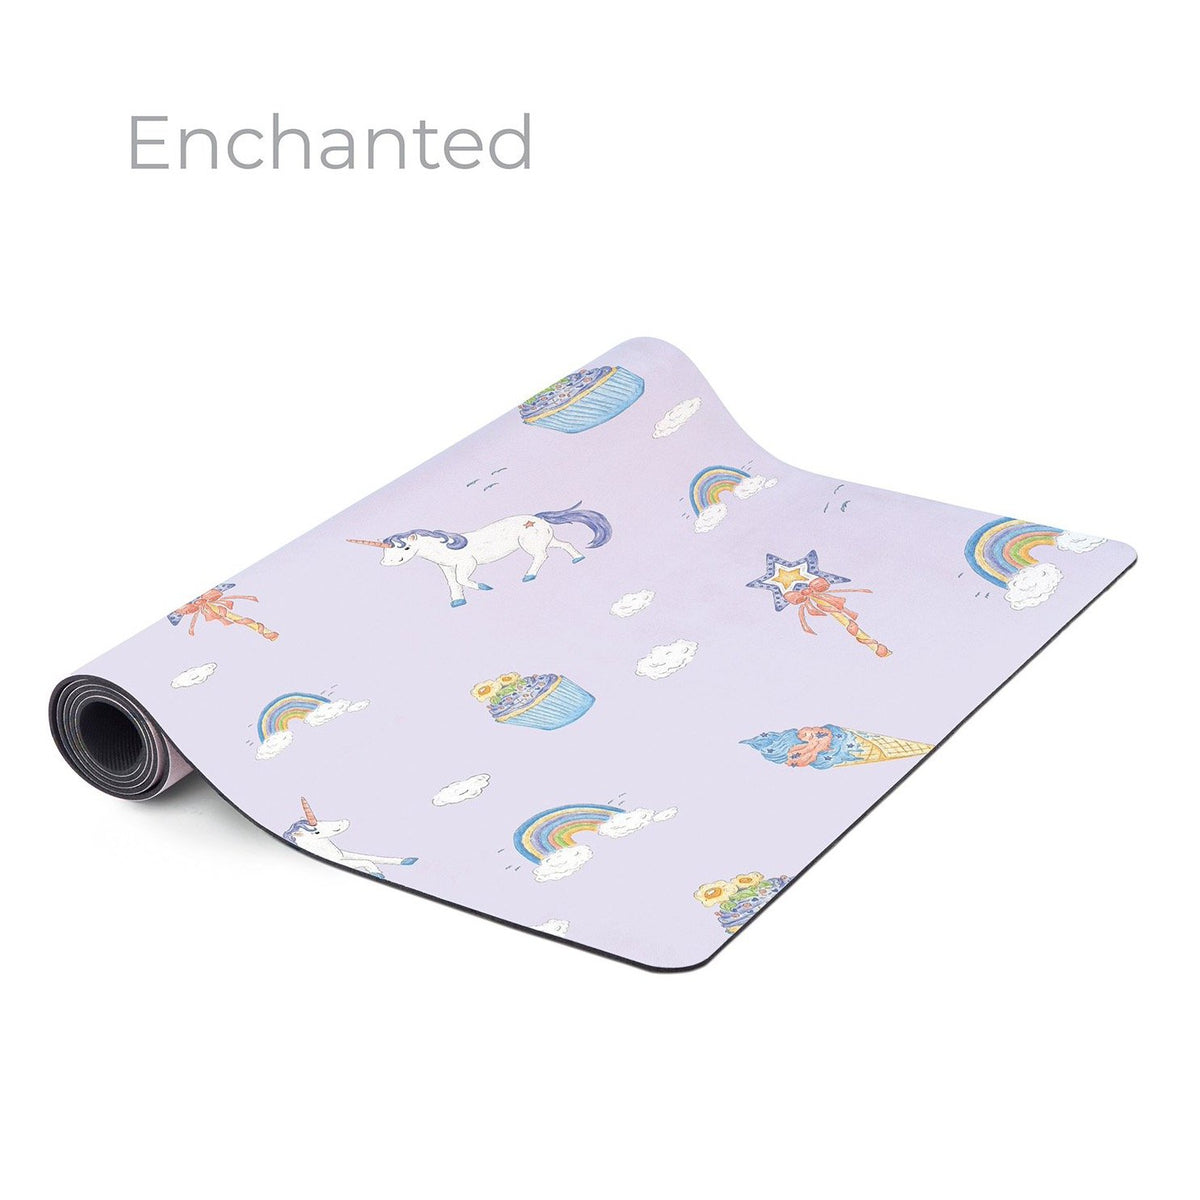 Kids Yoga Mat - 60” x 24” Yoga Mat for Kids Oriented 3mm Thick Yoga Mat,  Fun Prints Exercise Mats, Ideal for Babies, Toddlers and Children - Non  Toxic